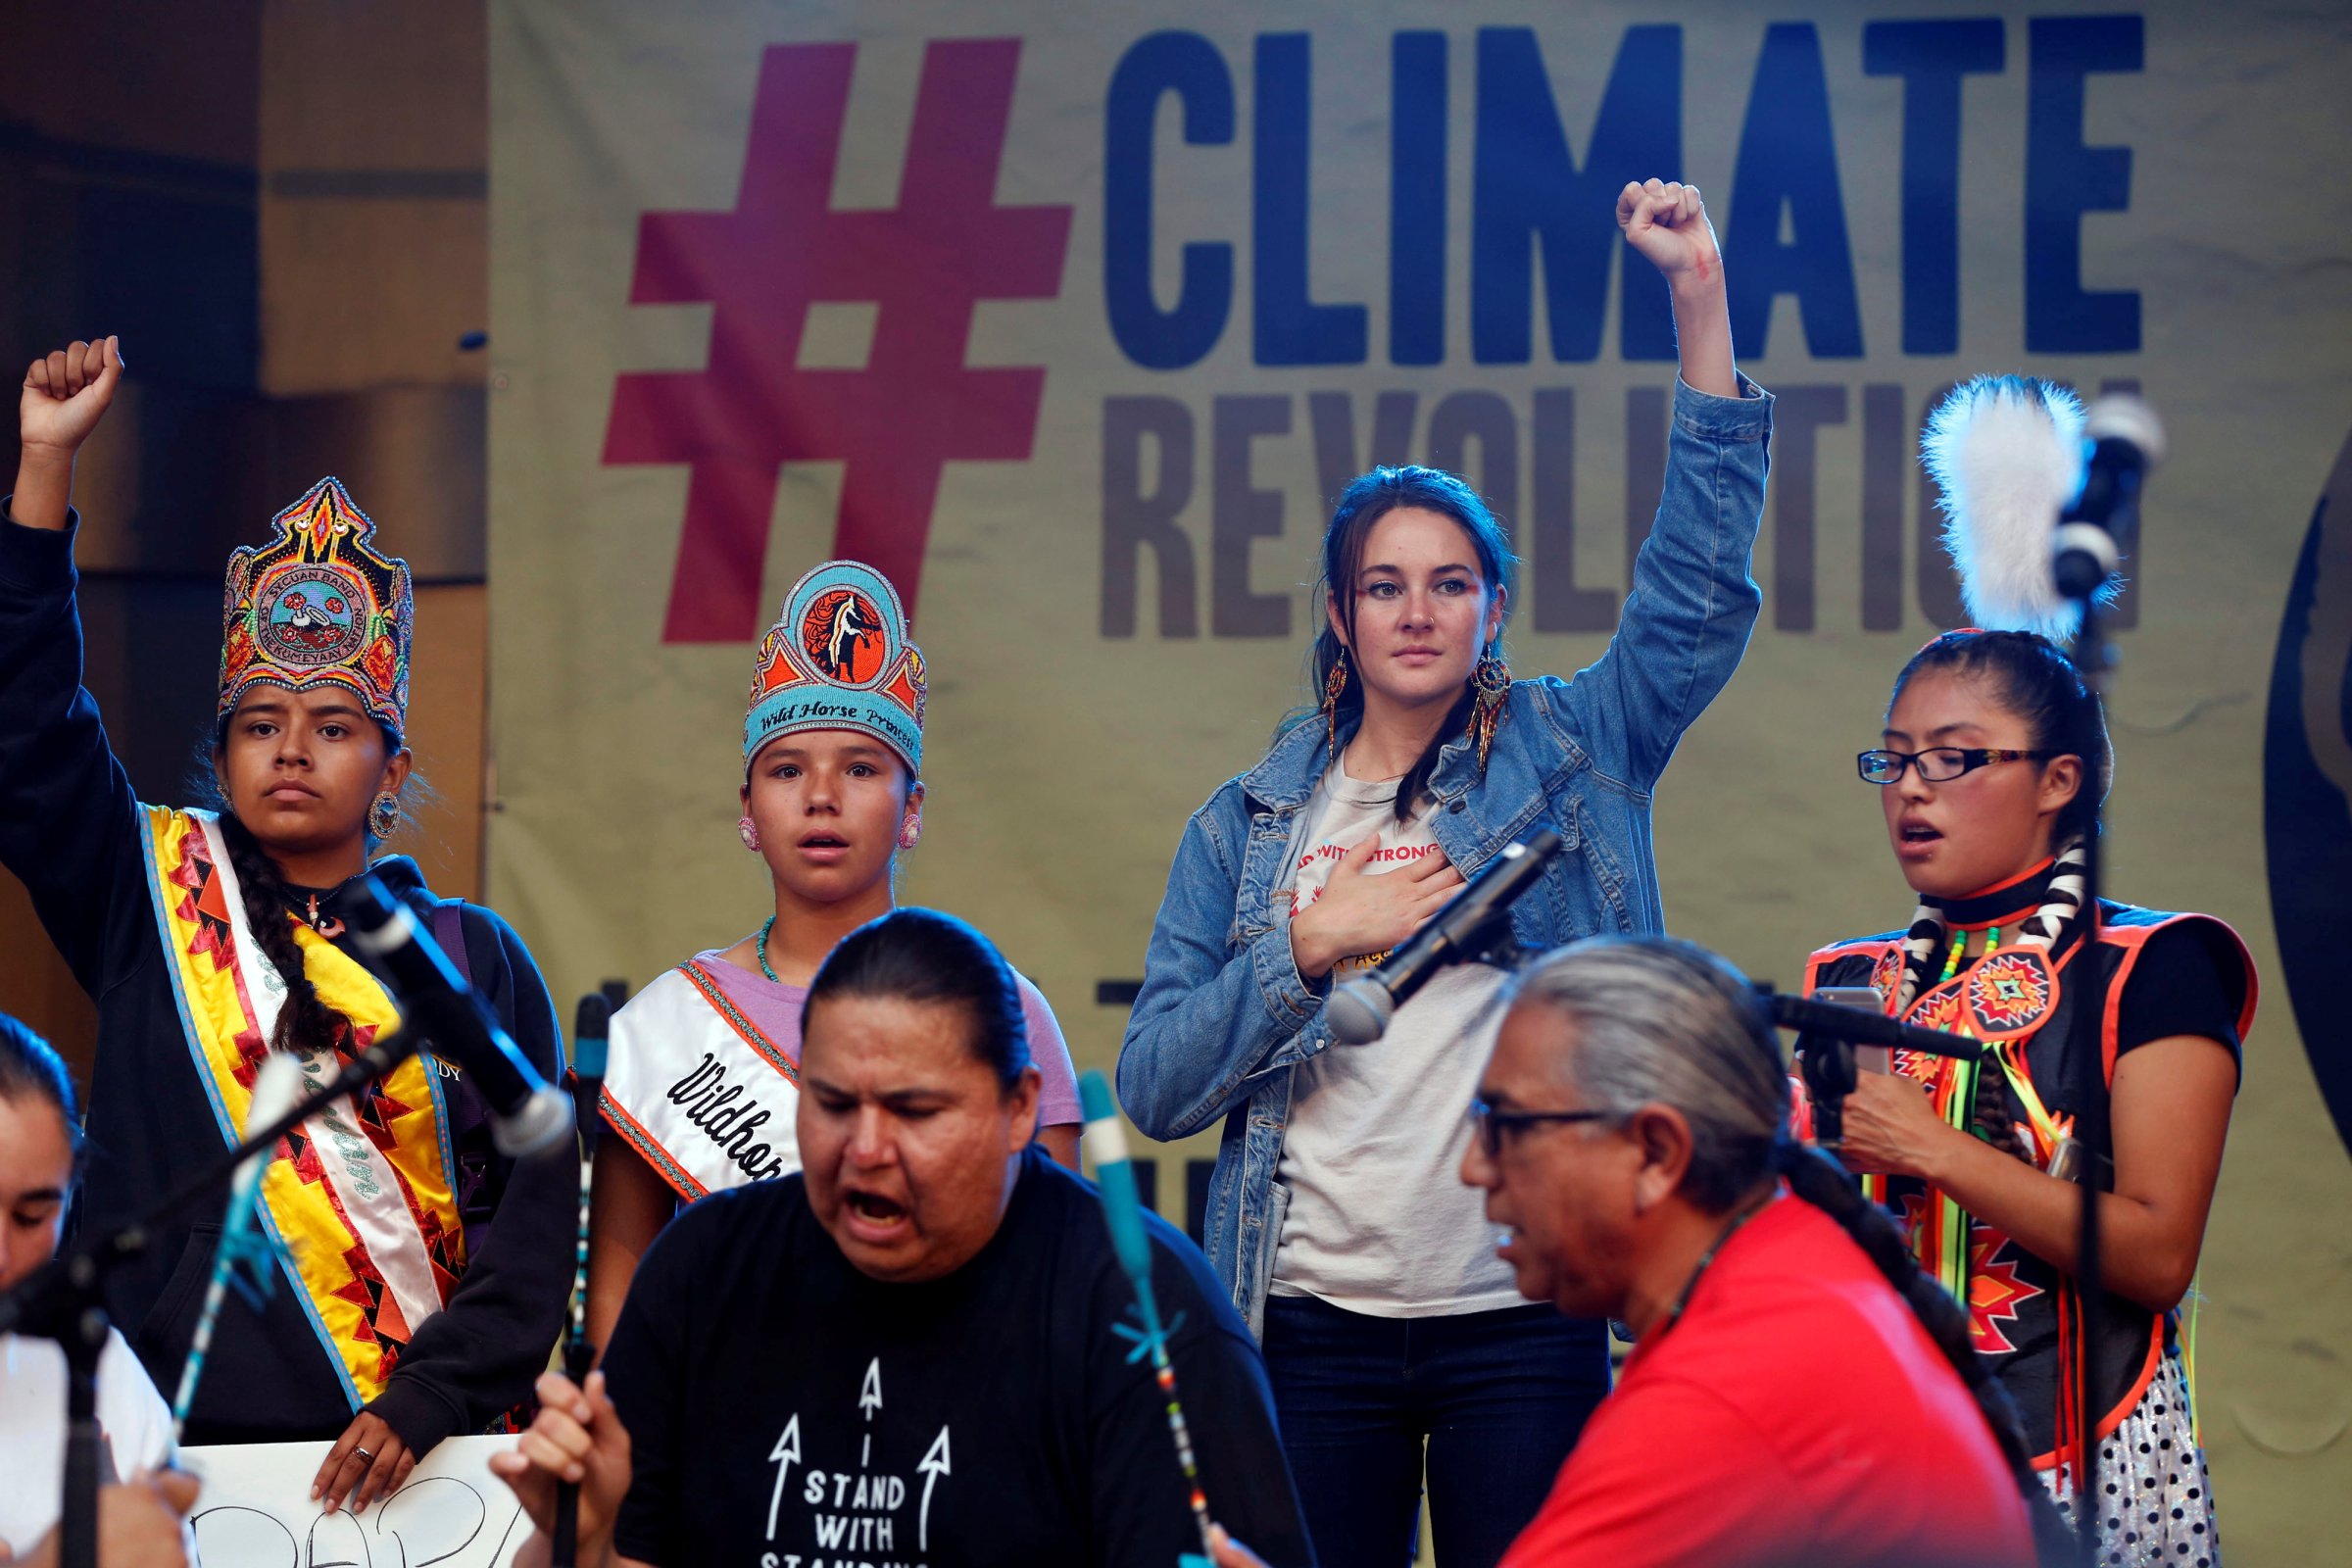 Actor Shailene Woodley stands with Native Americans on stage during a climate change rally in solidarity with protests of the pipeline in North Dakota at MacArthur Park in Los Angeles, California